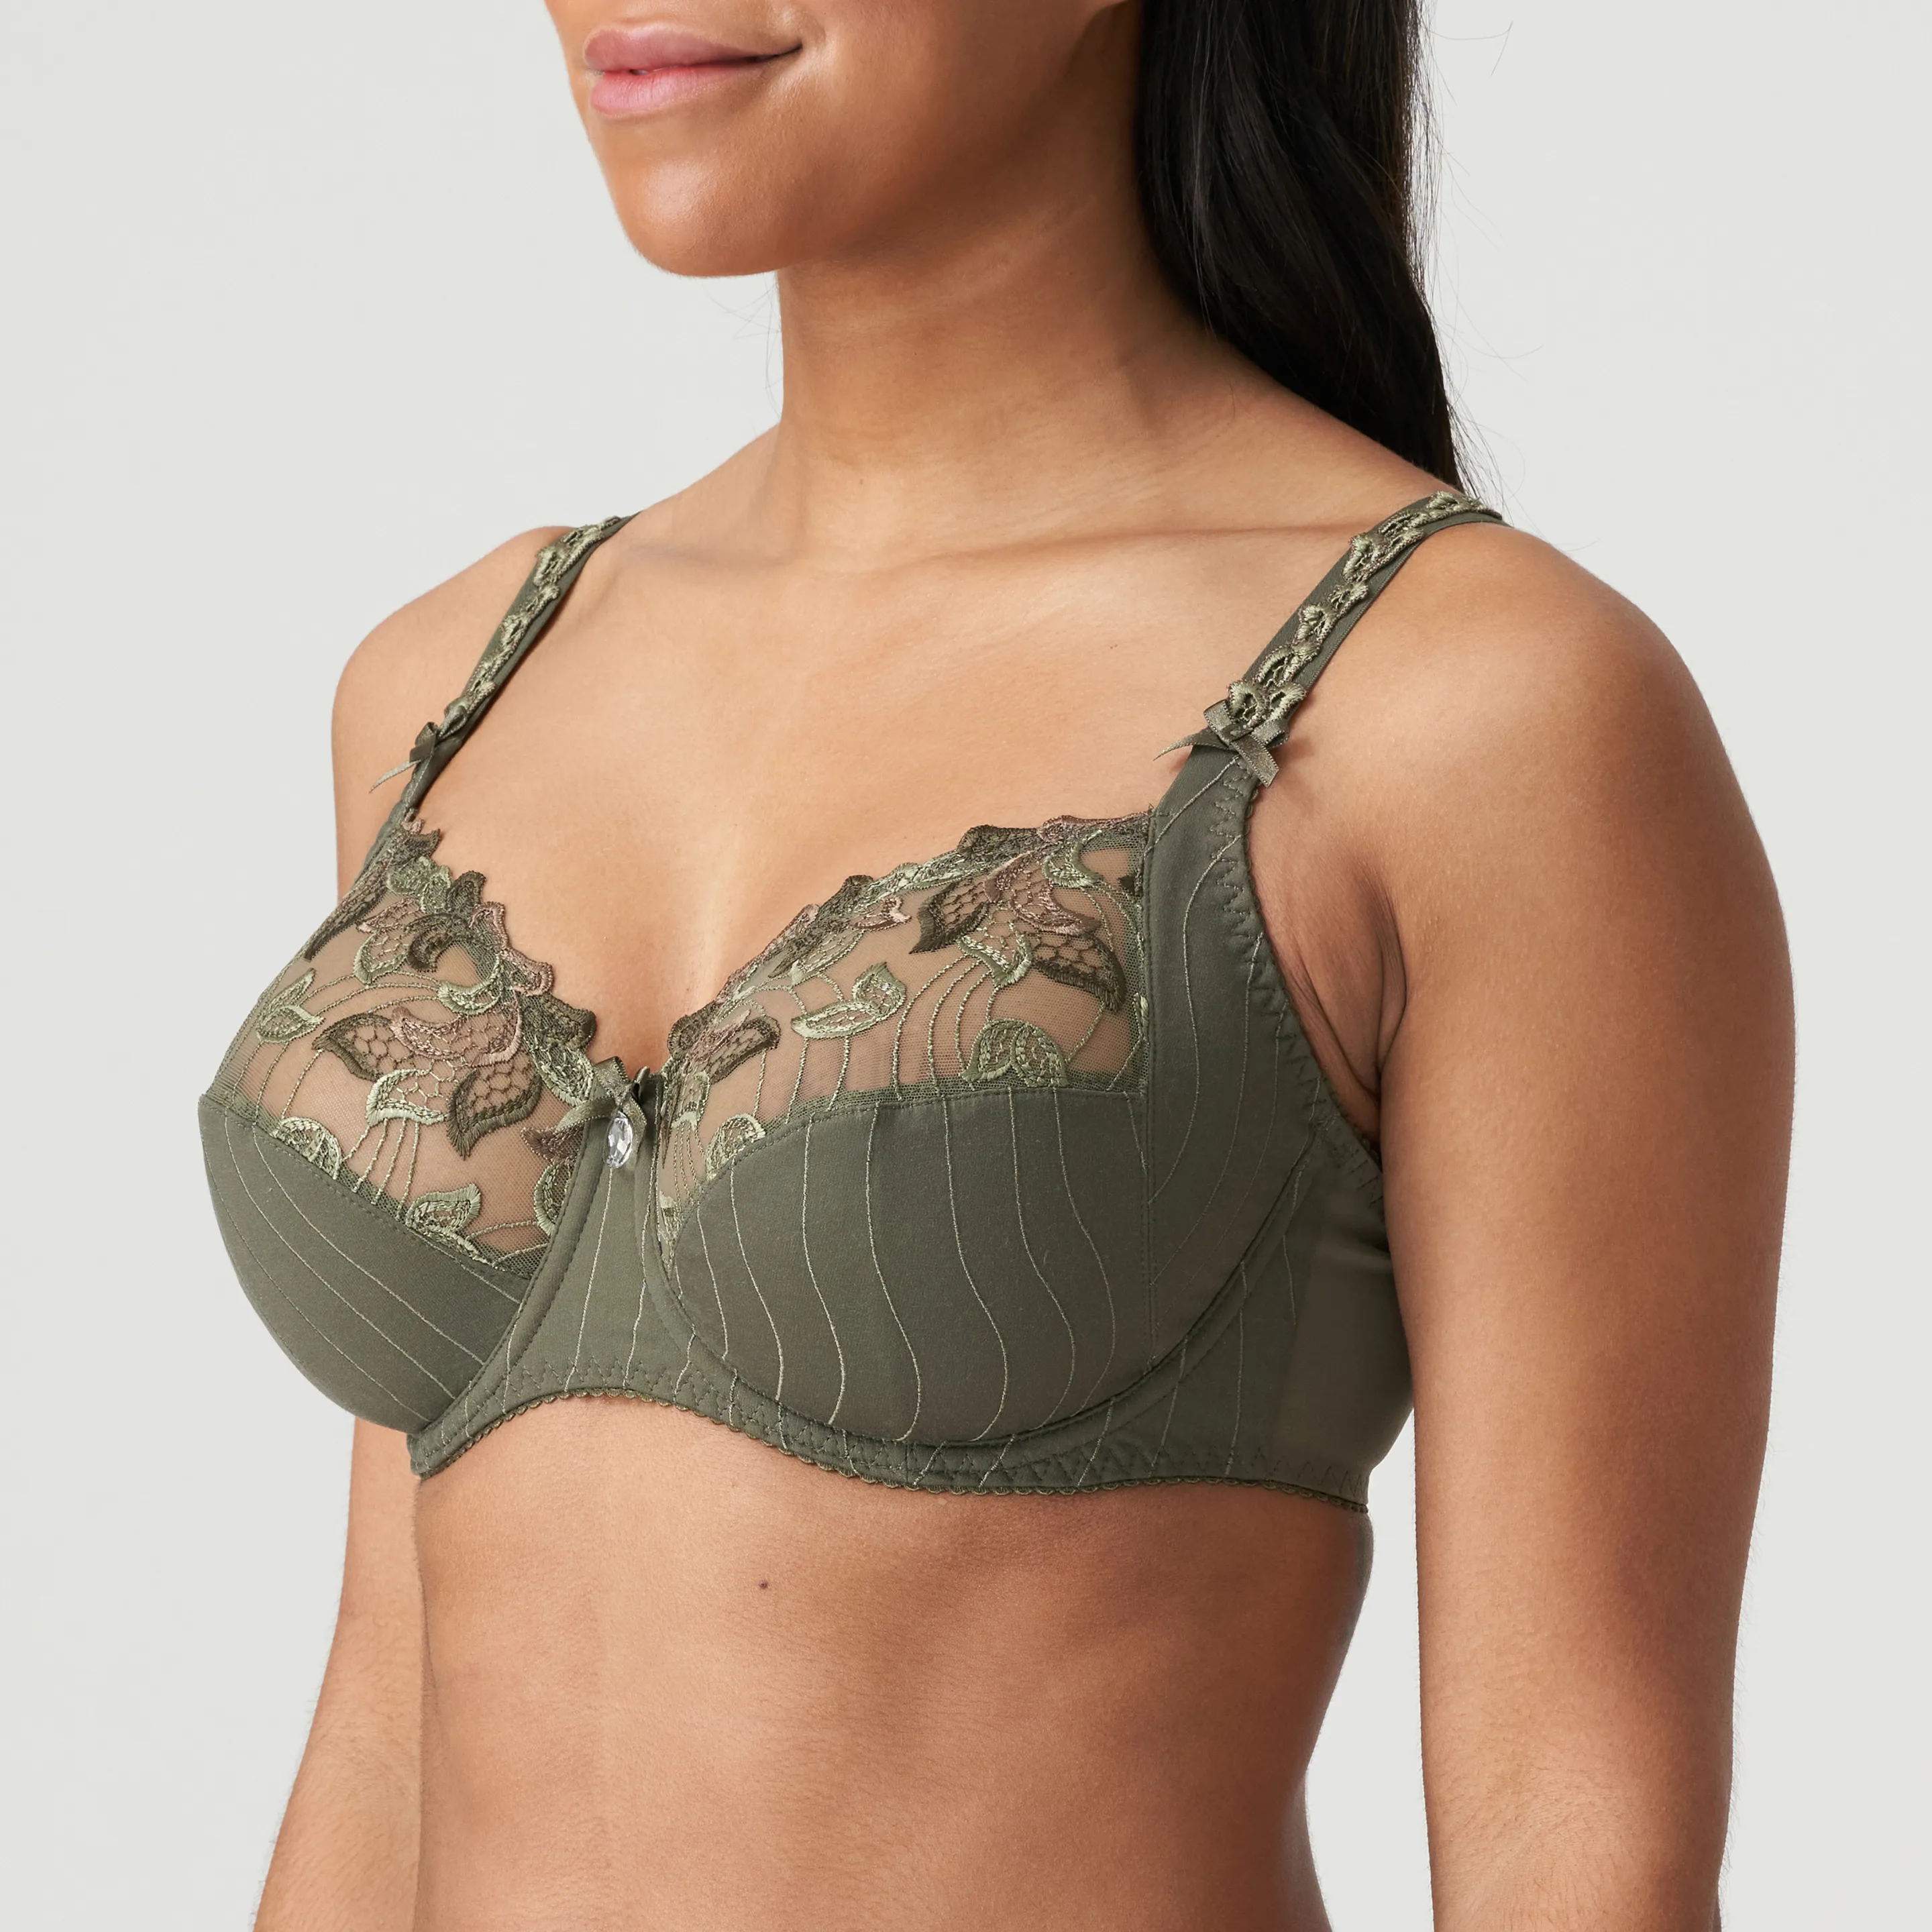 PrimaDonna Deauville Paradise Green Full Cup Bra